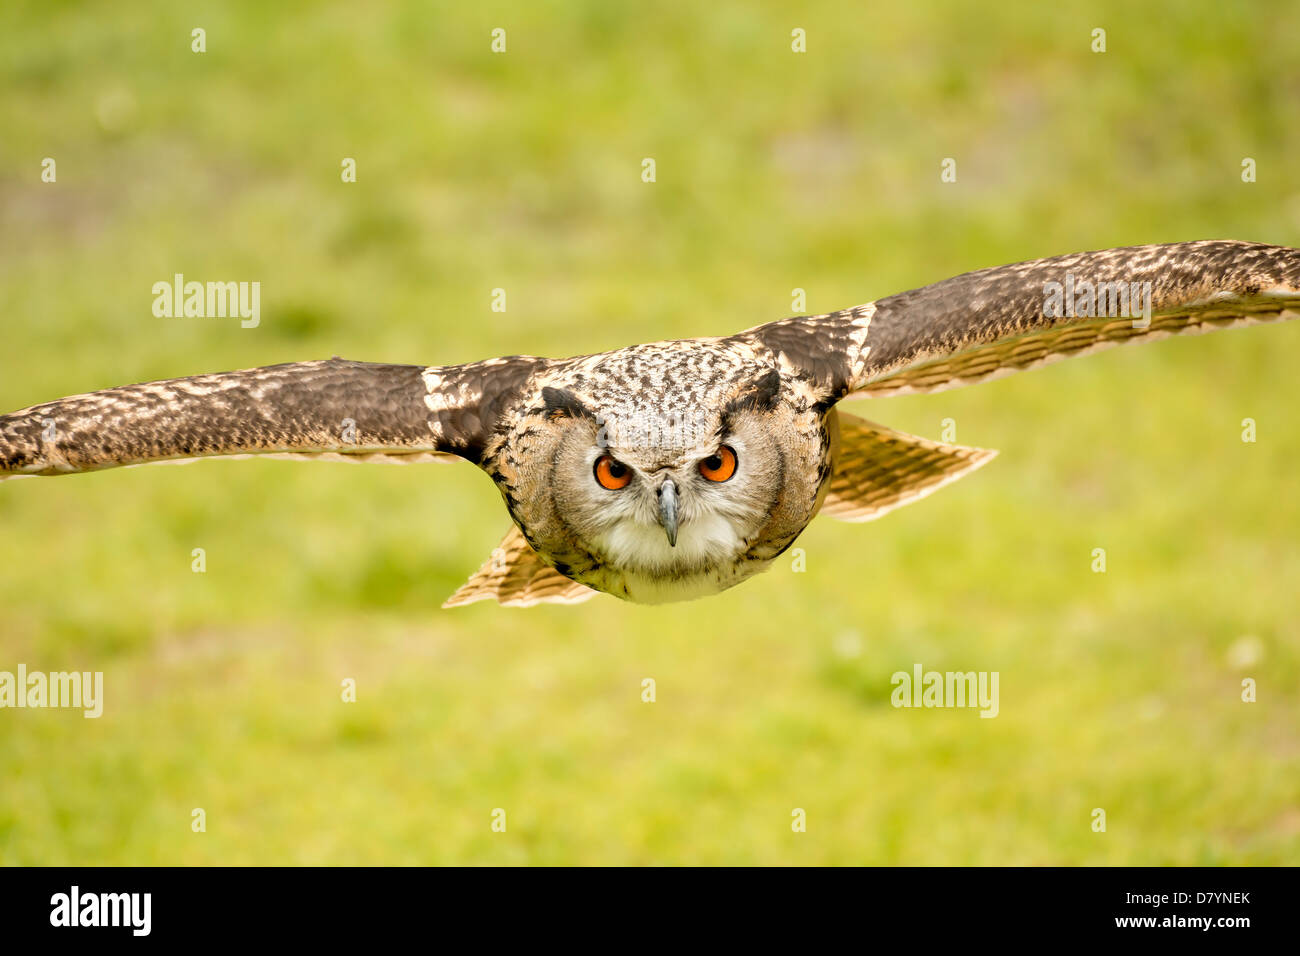 picture of a flying eagle owl Stock Photo